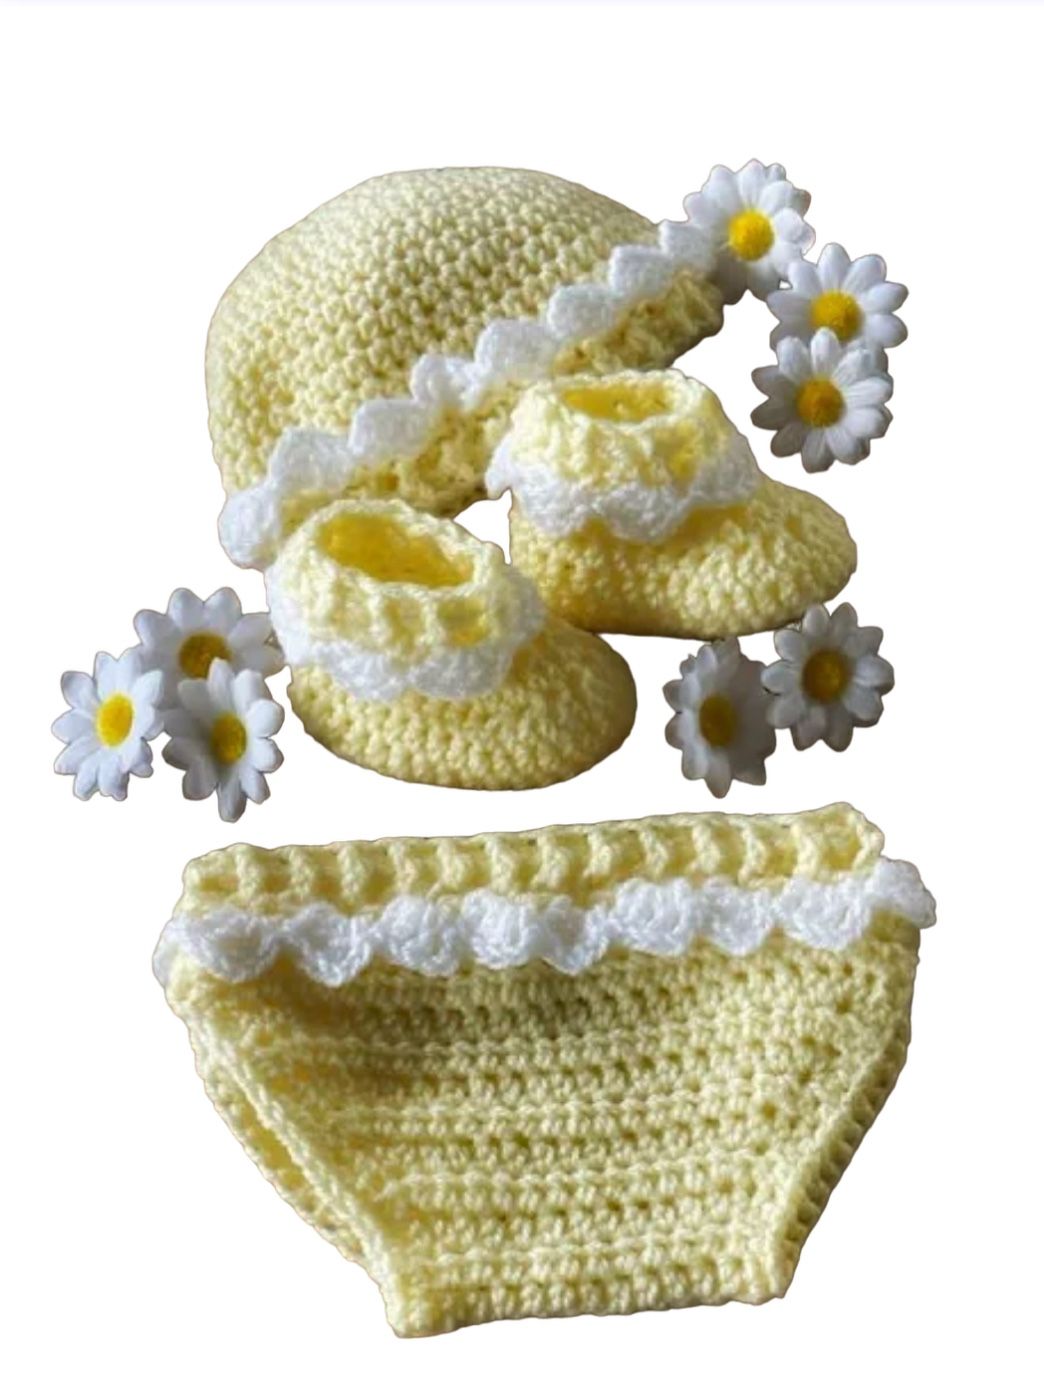 Spring Crocheted Diaper Cover 3 Piece Set 